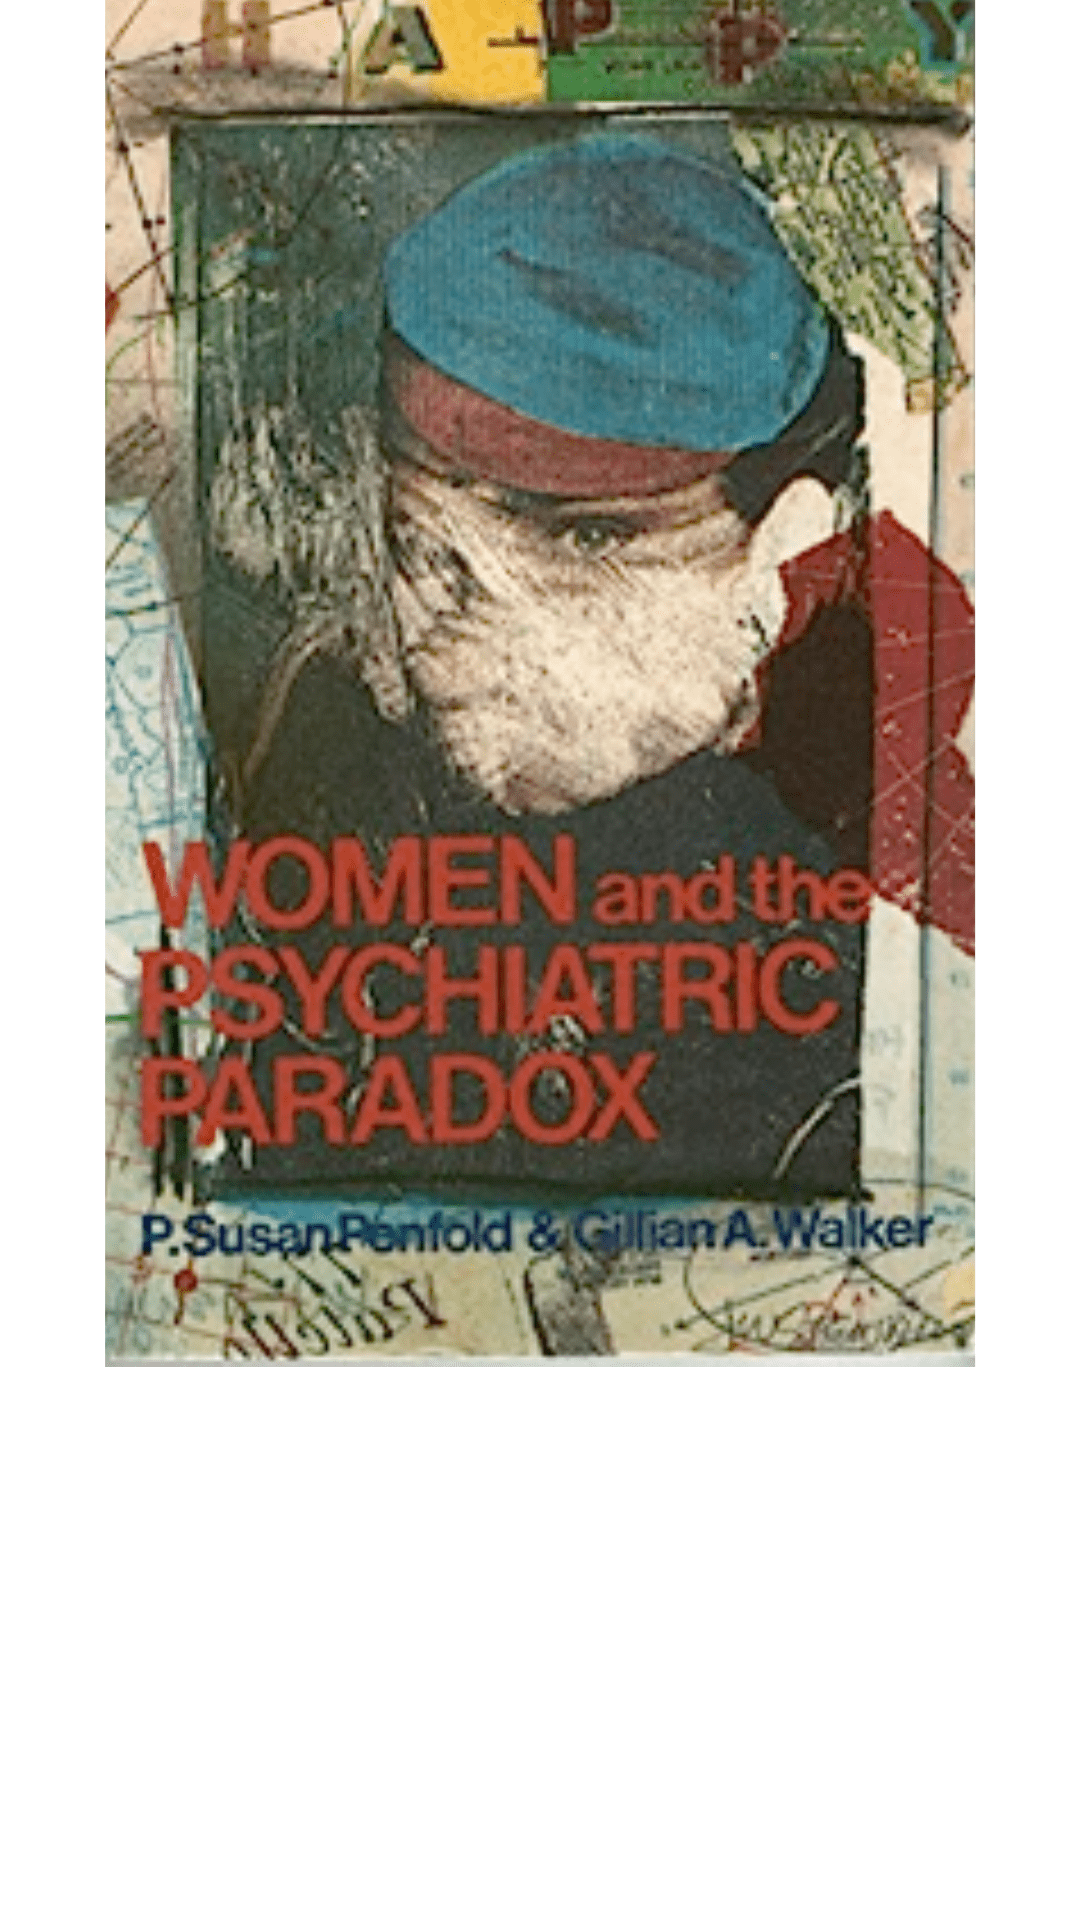 Women and the Psychiatric Paradox